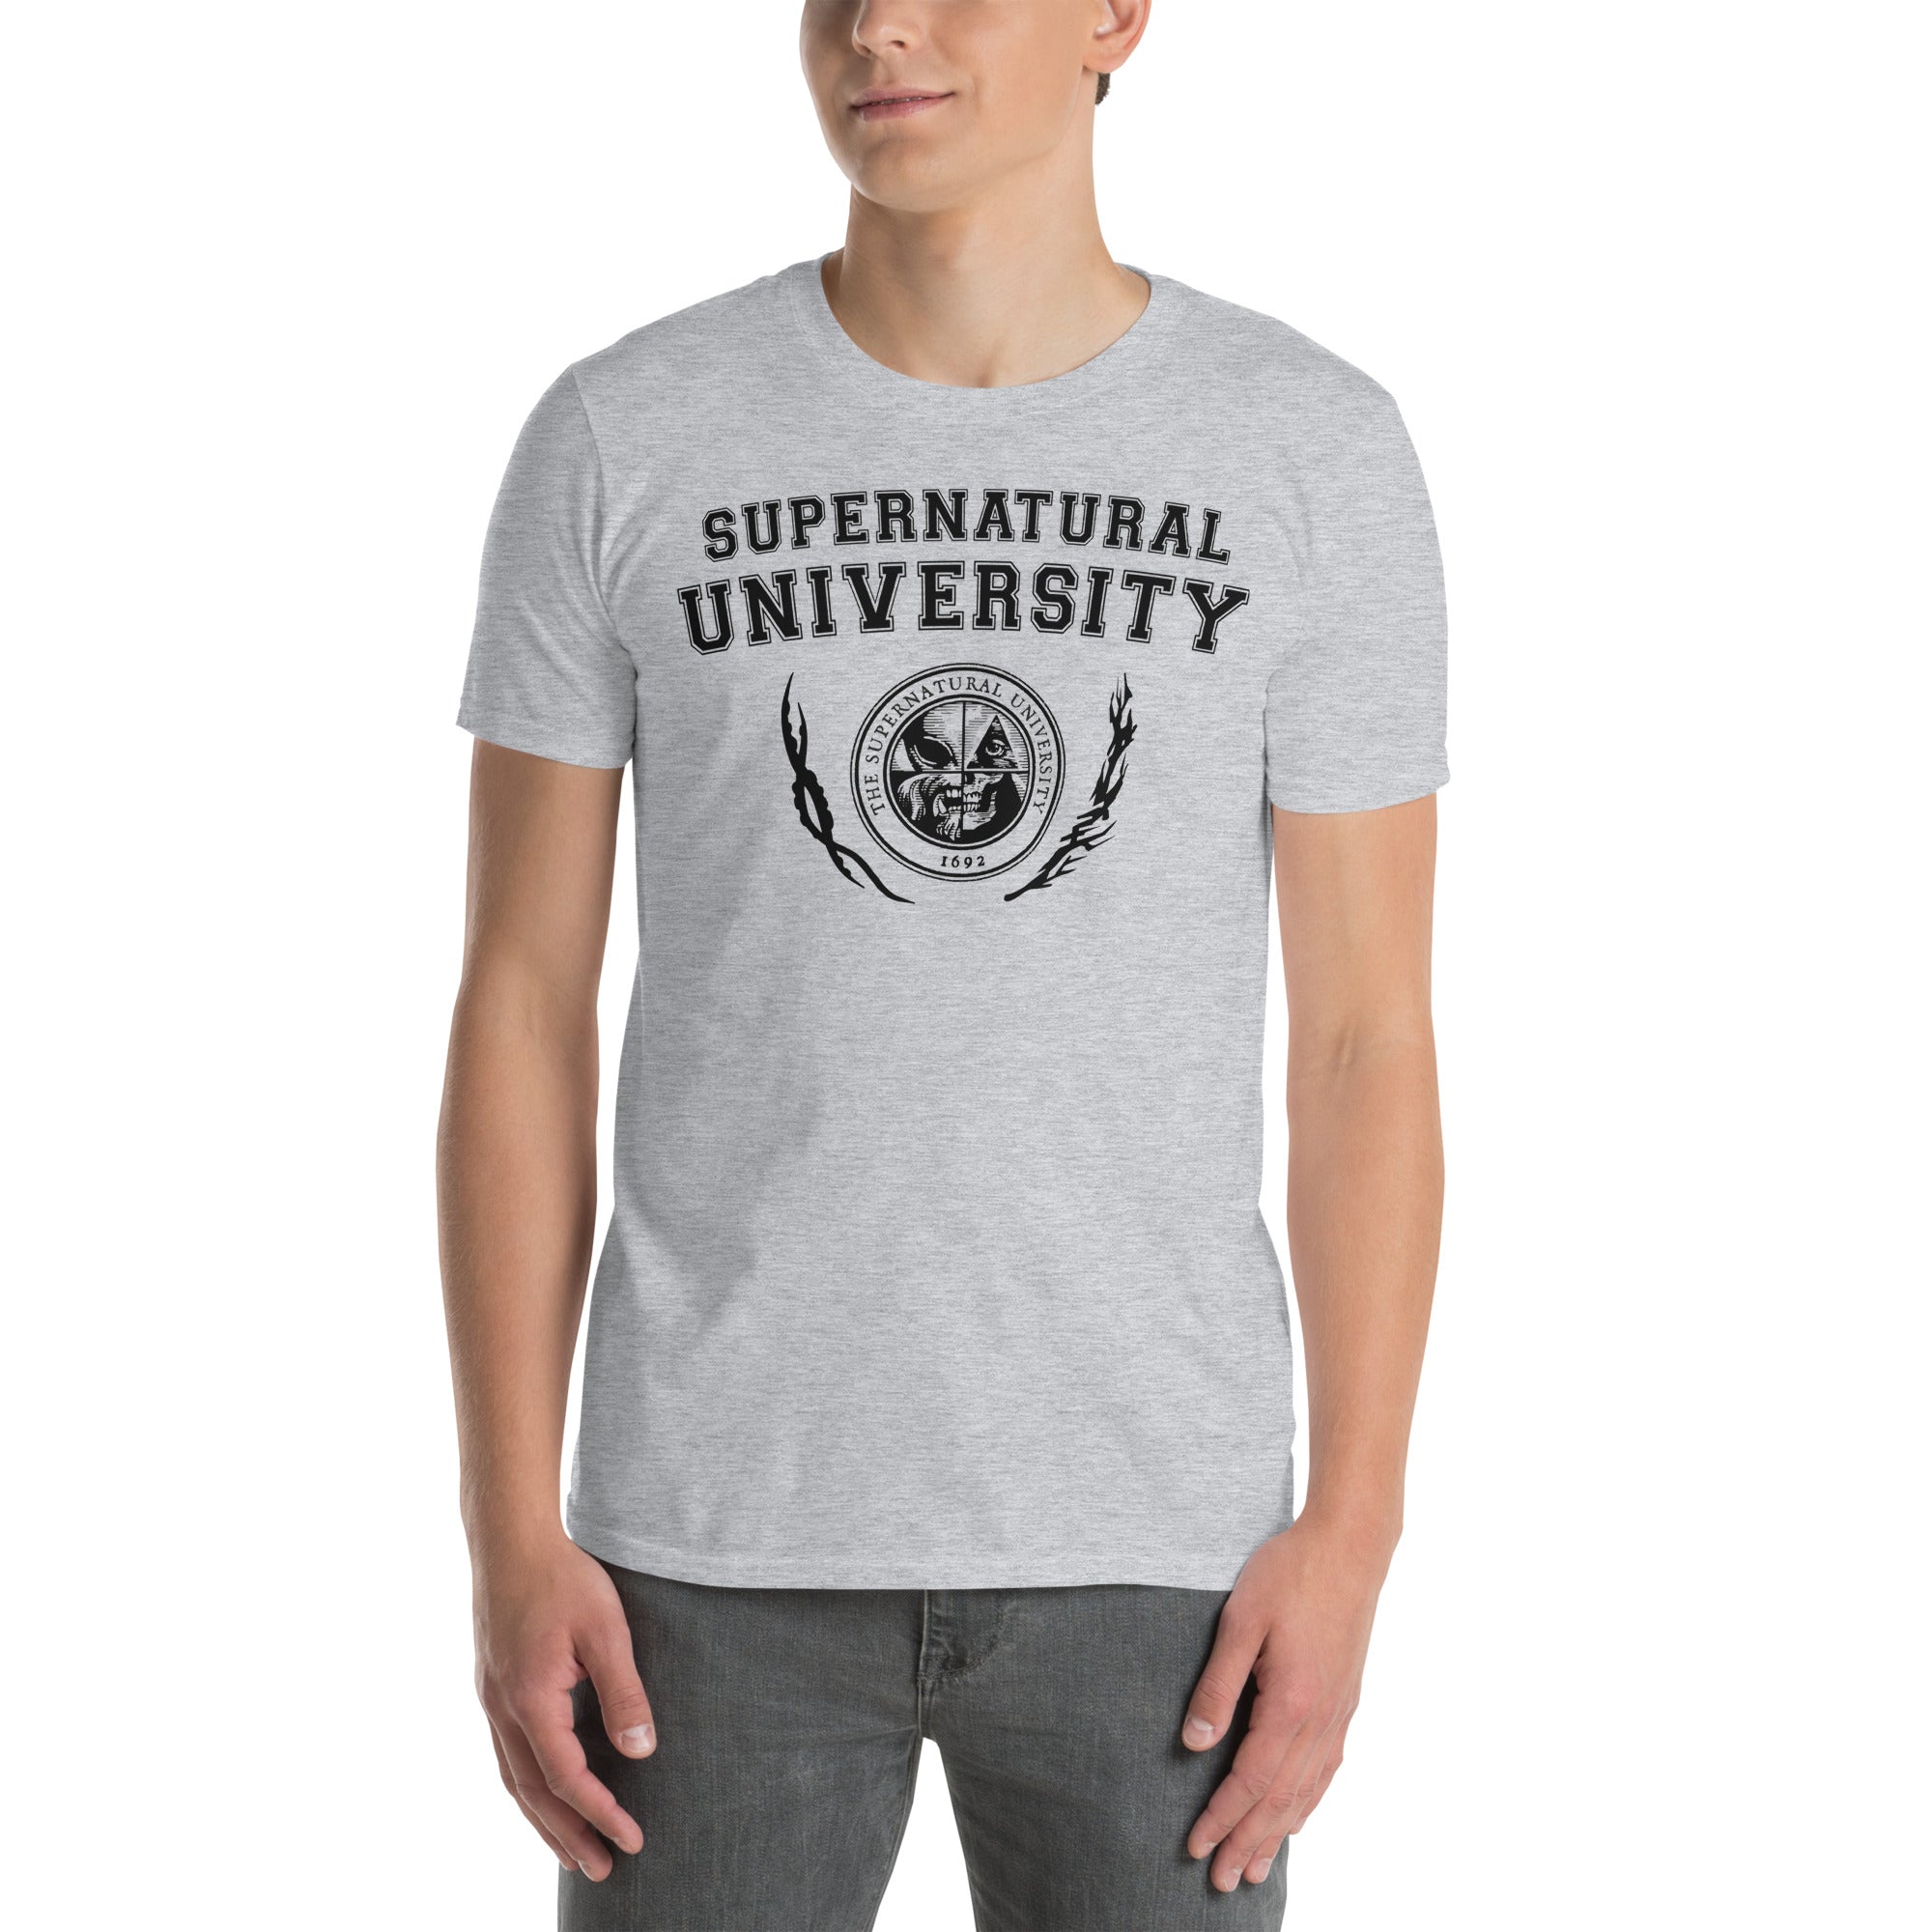 The Supernatural University™ Collegiate Tee - softstyle